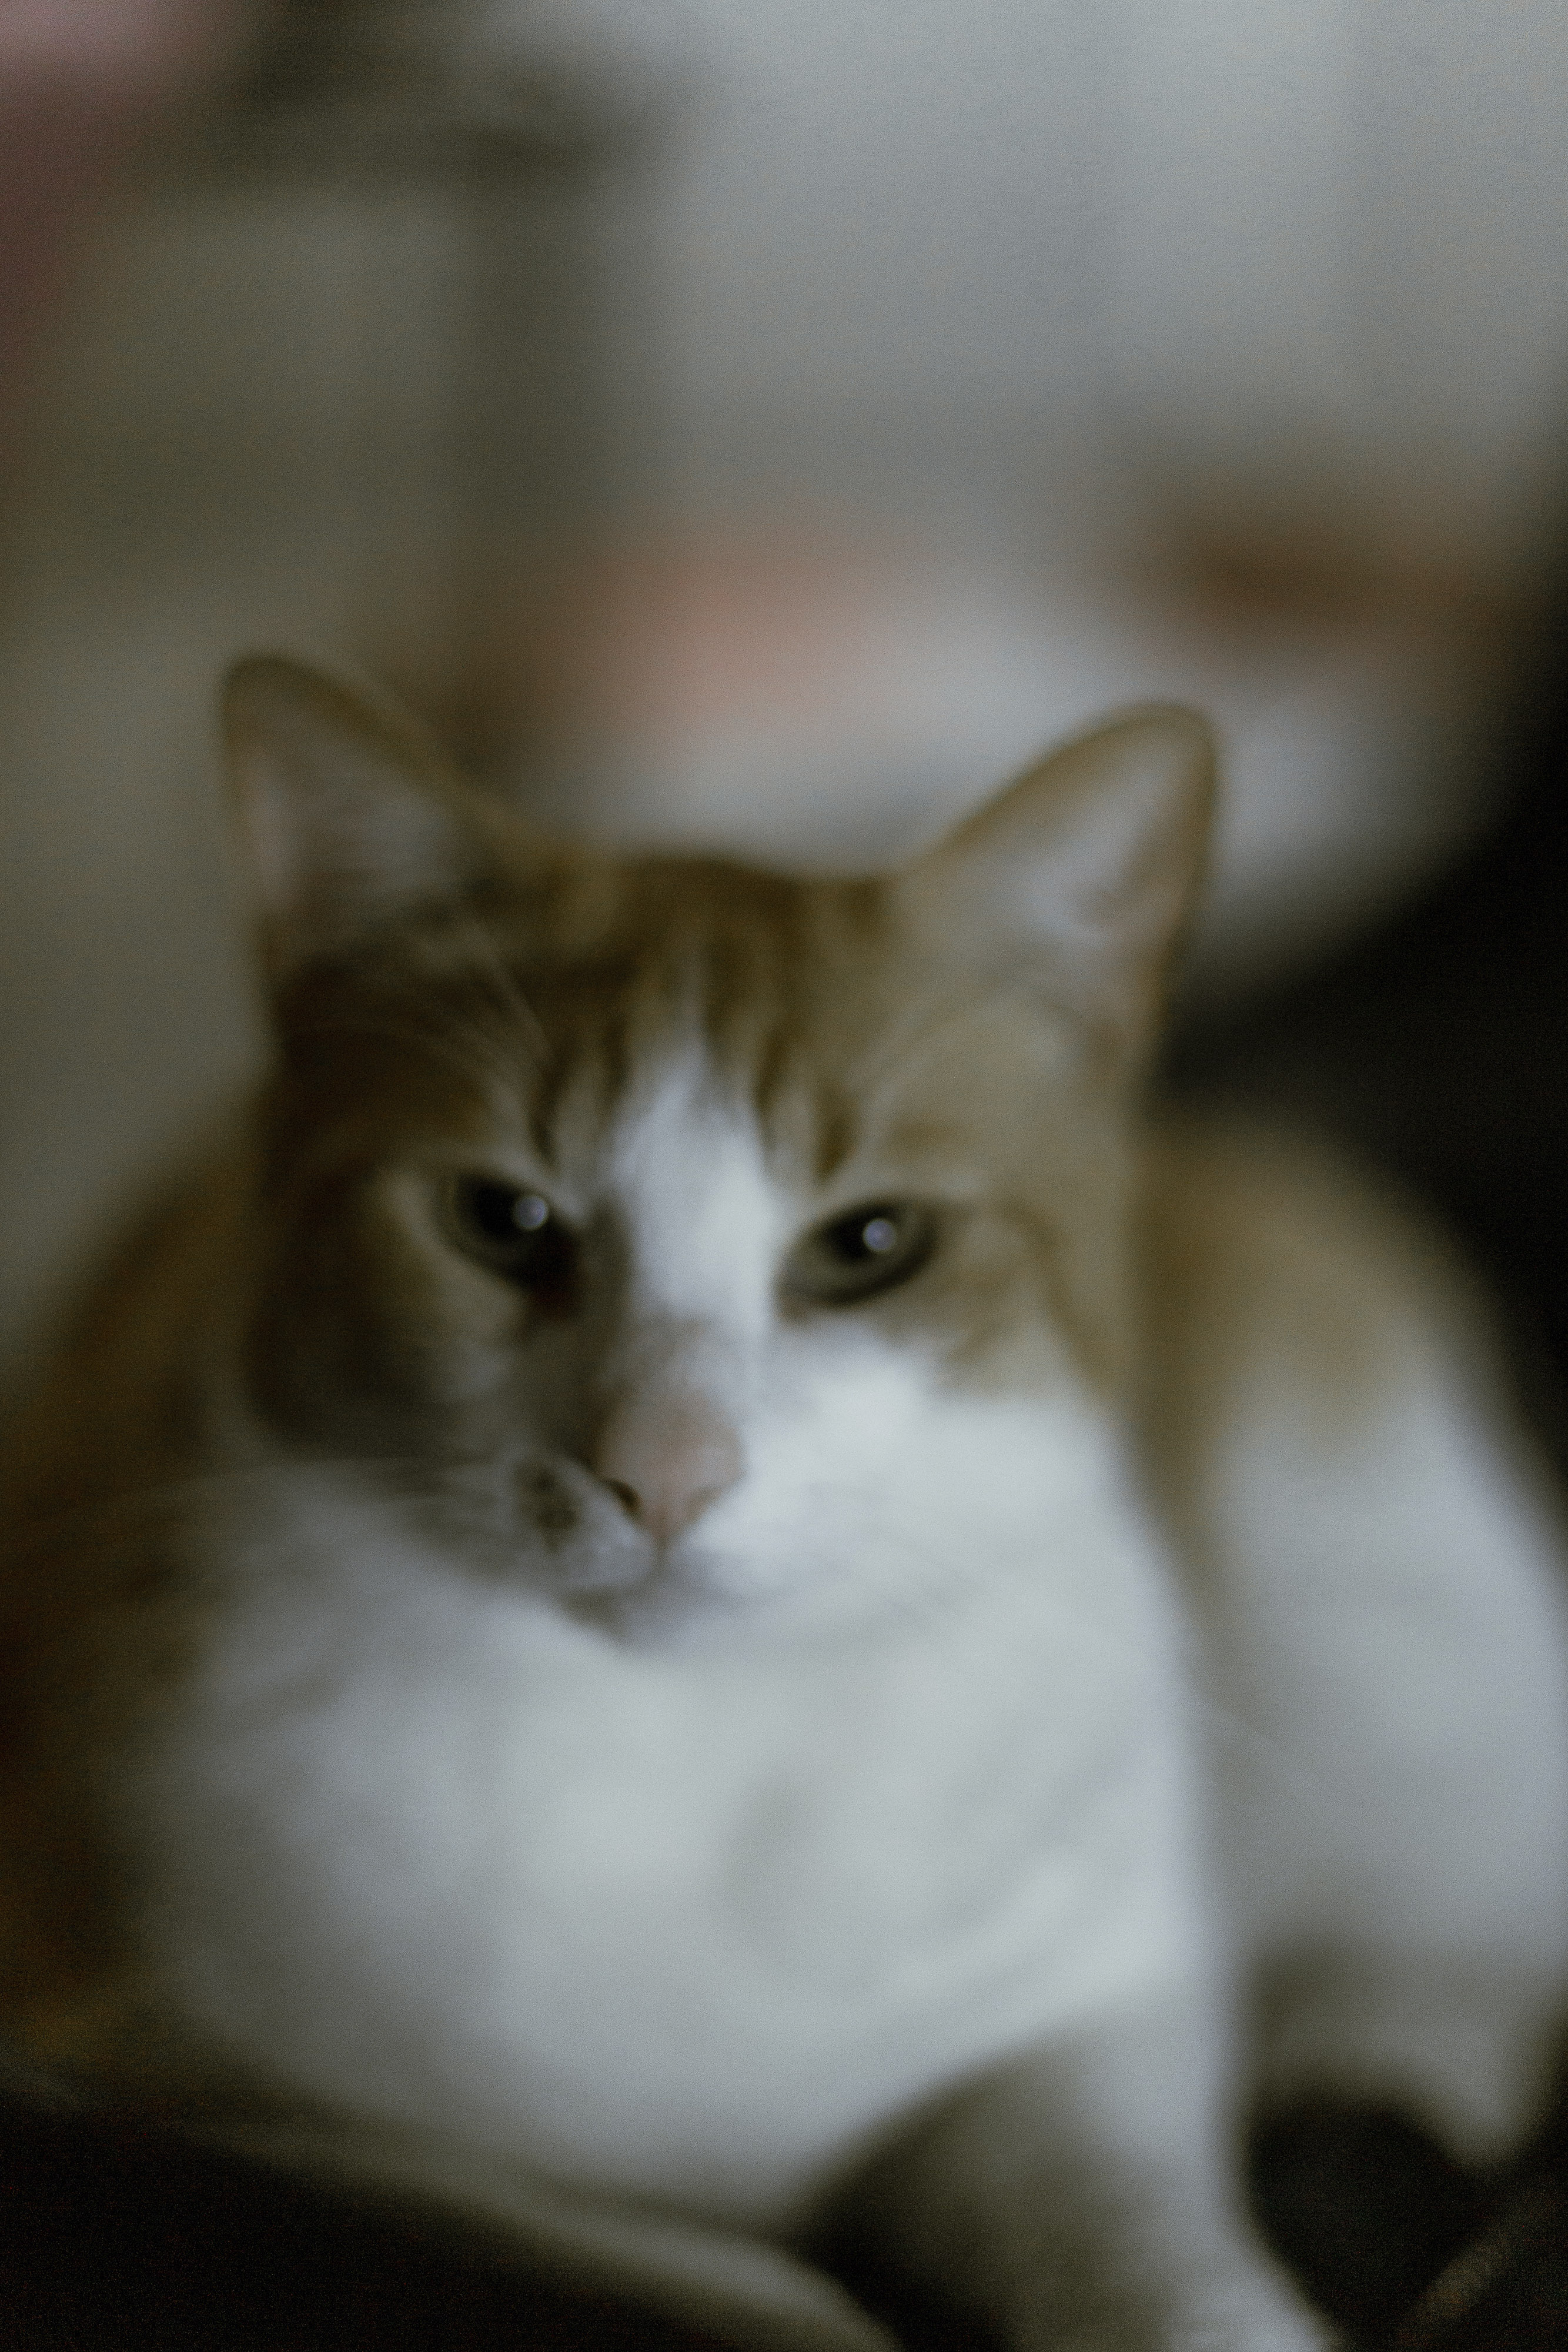 Romeo out of focus